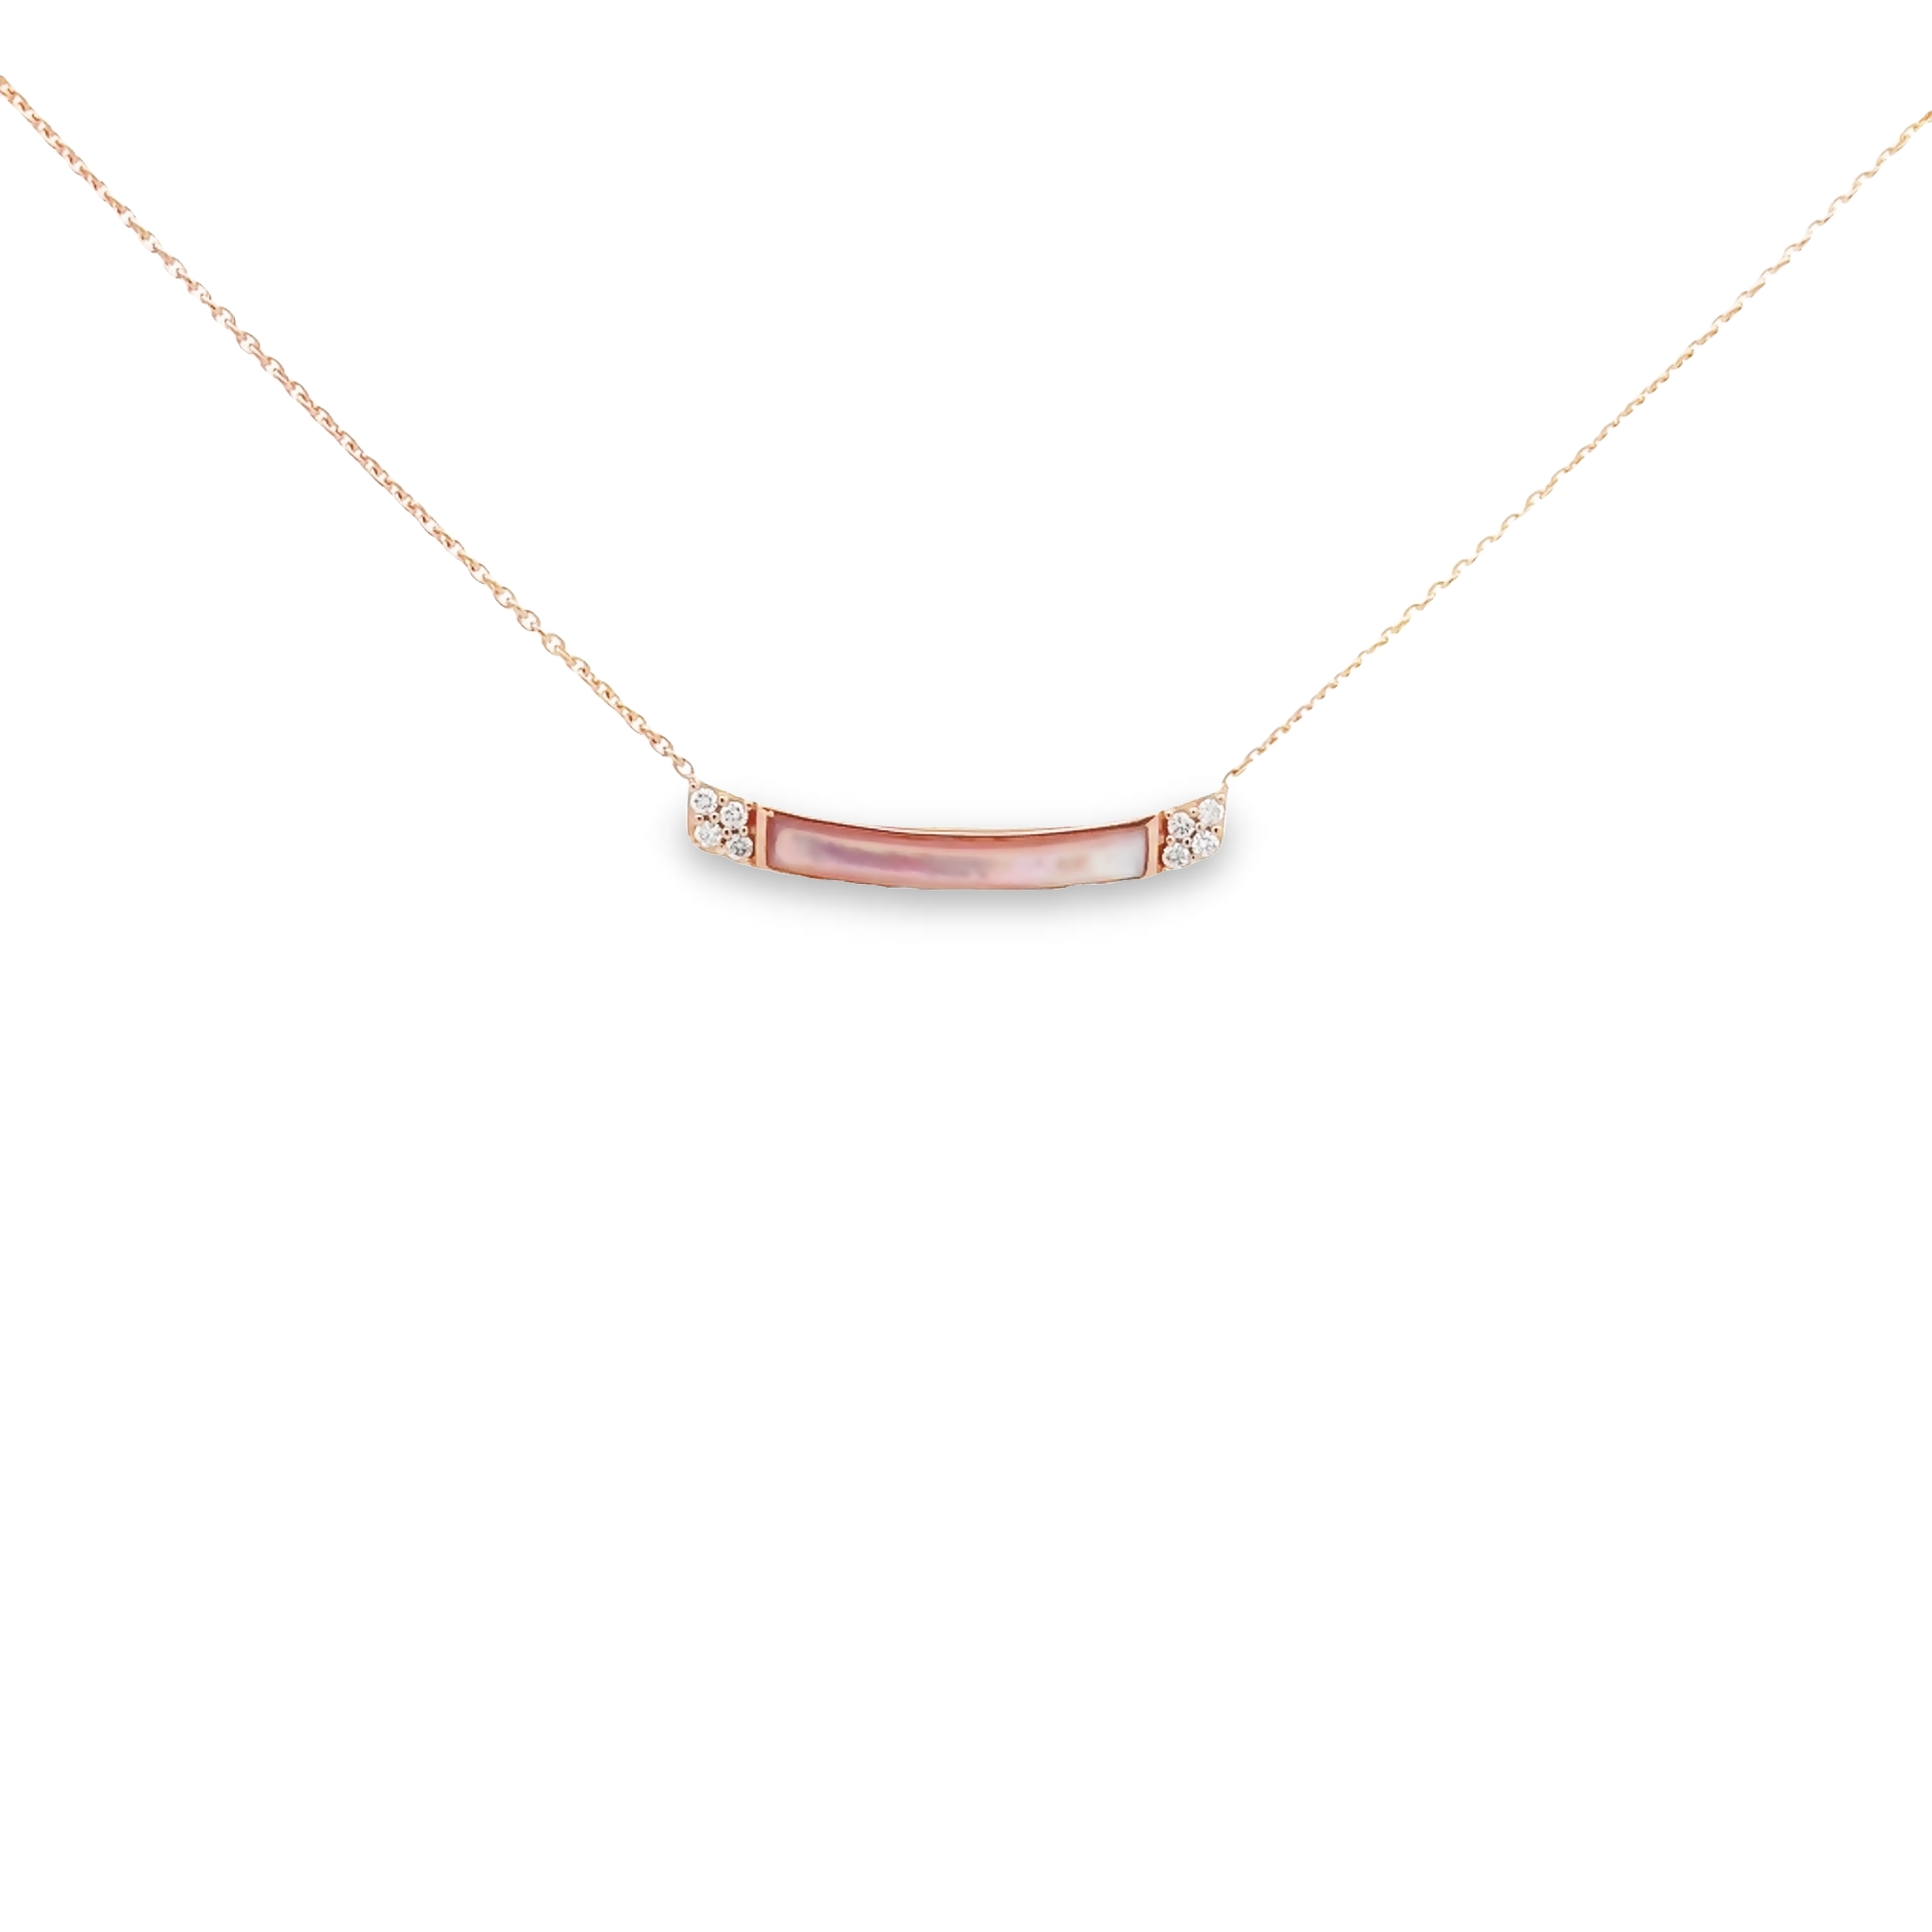 14 Karat Rose Gold Bar Pendants With 4=0.09 Total Weight Round Brilliant G Vs Diamonds And Pink Mother Of Pearl Inlay.